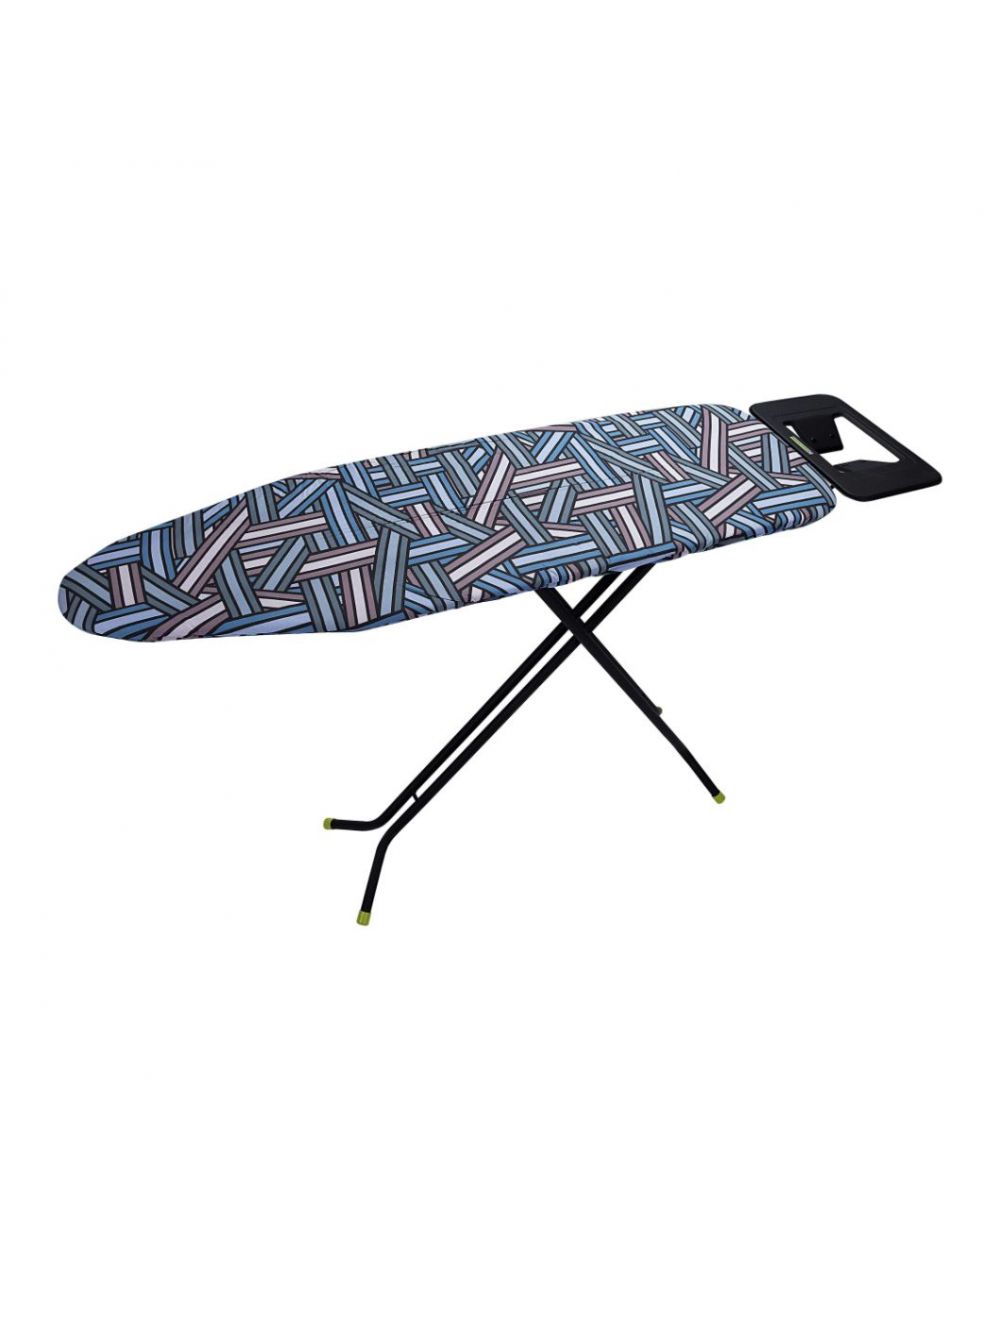 Royalford RF8523 110 x 34 cm Ironing Board with Steam Iron Rest